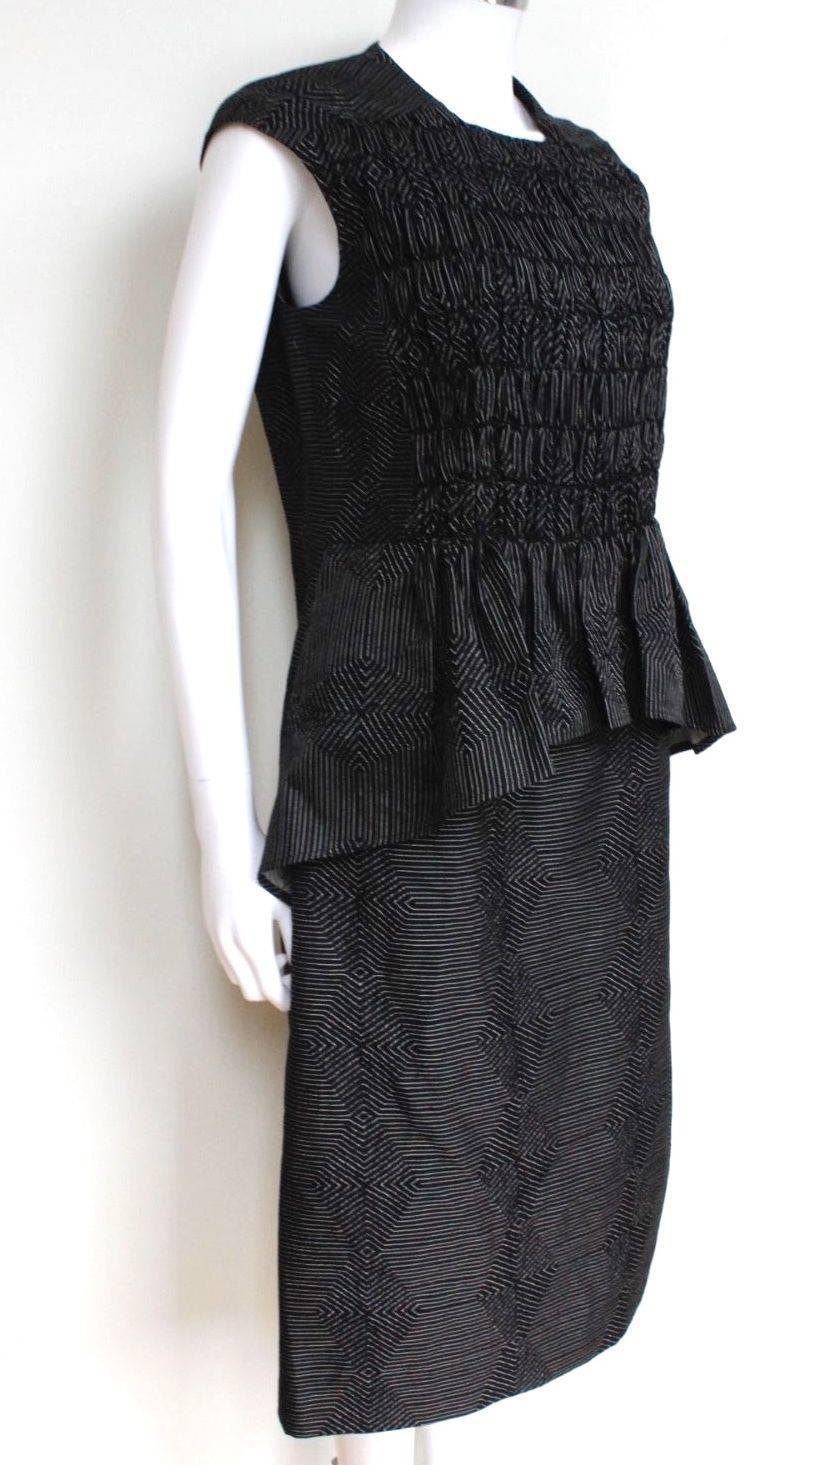 Dries Van Noten Charcoal Peplum Jacquard Dress 40 uk 12
Ruched bodice, with pleated peplum detail
Concealed hook fastening to the back 
55% cotton, 21% wool, 21% polyester 3% acatate
Fitted at the bust and waist, loose at the hip. Mid-weight,